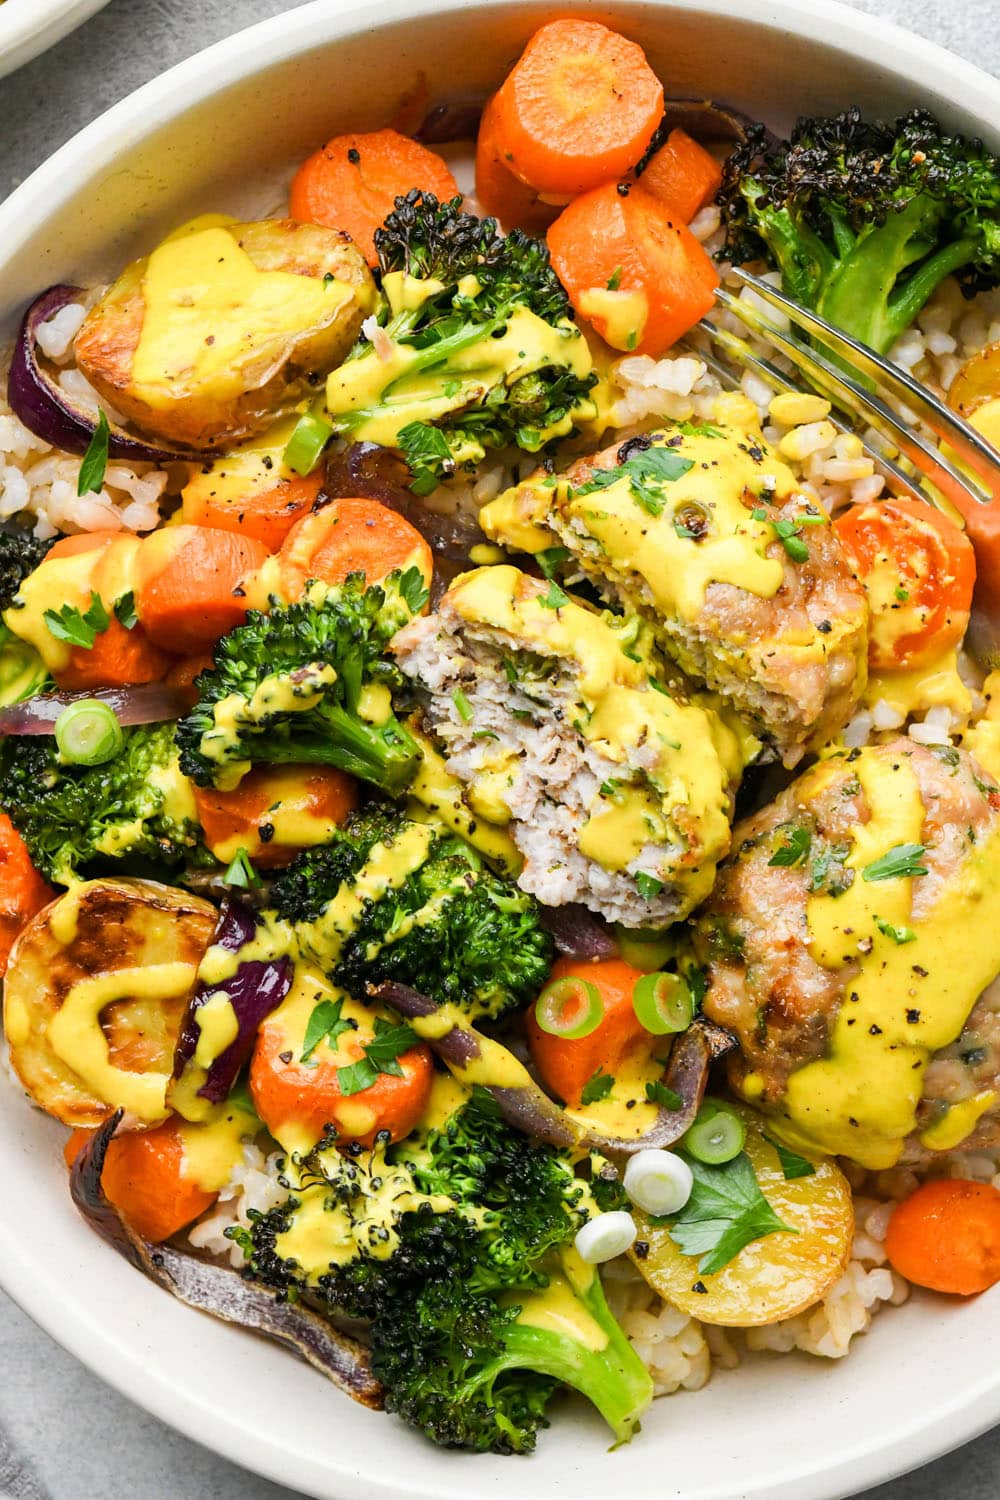 A wide ceramic bowl filled with brown rice, colorful roasted vegetables, ground chicken patties cut in half, topped with a bright yellow turmeric tahini sauce and fresh herbs.